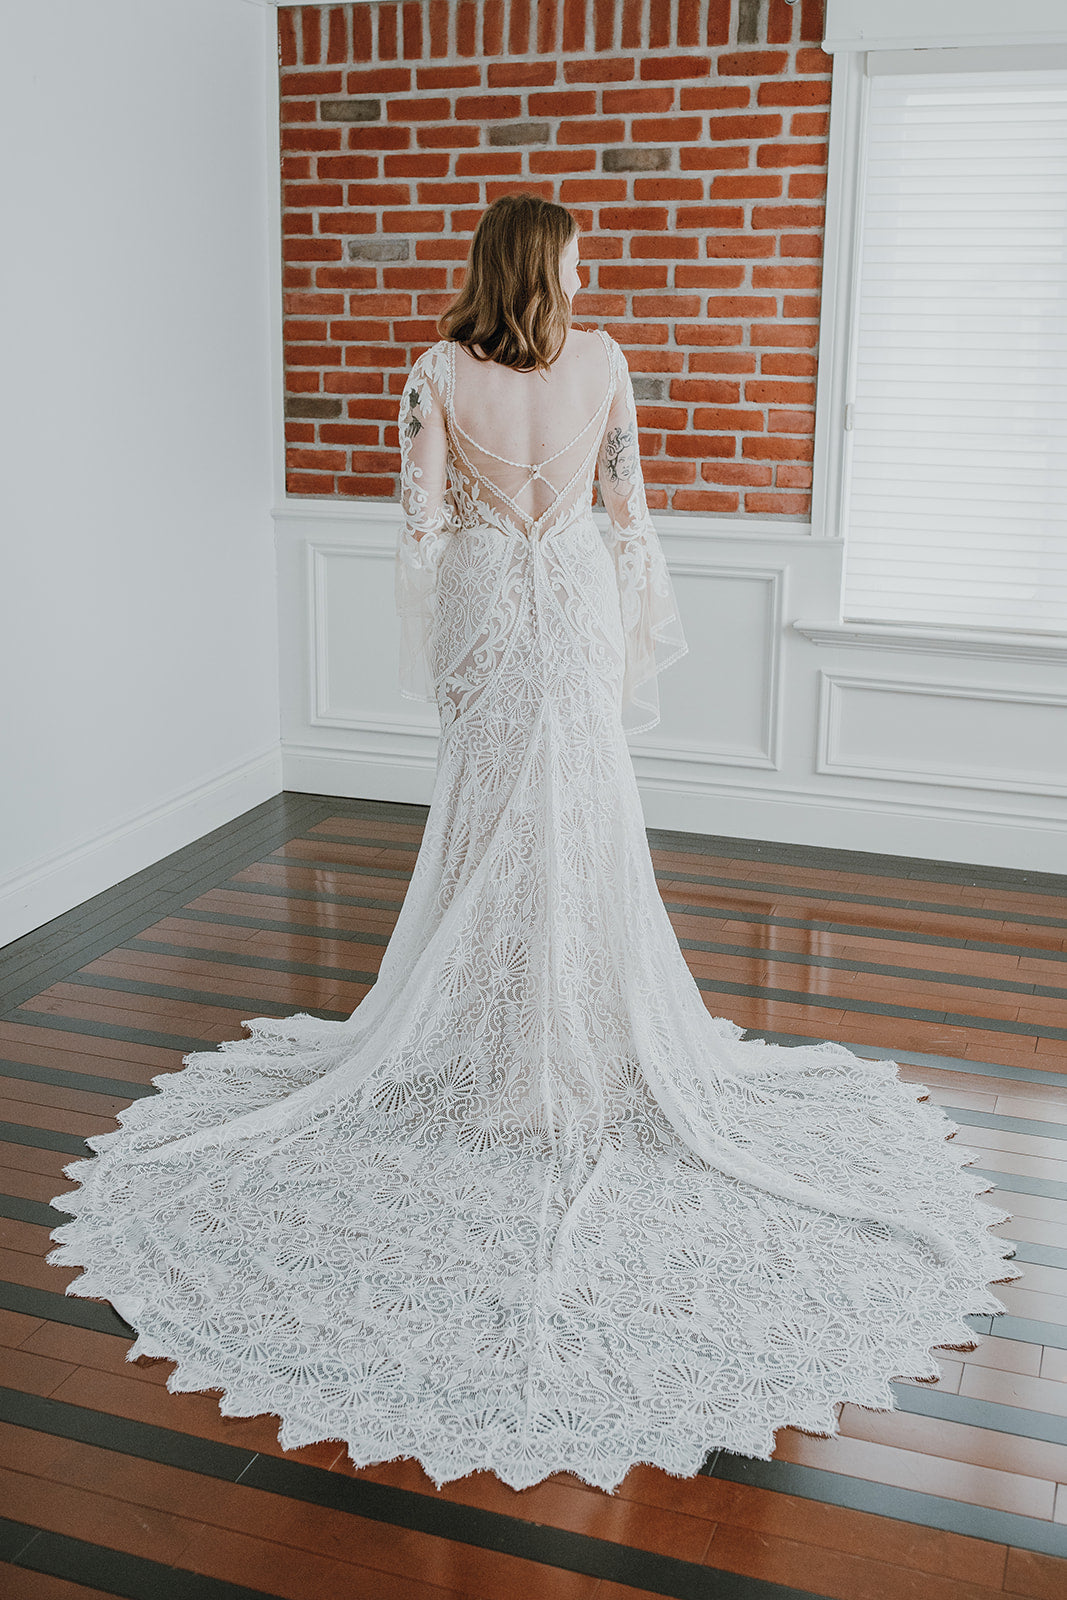 Wilson *sample size 8 - fitted lace boho wedding dress with lightweight tulle bell sleeves and open back